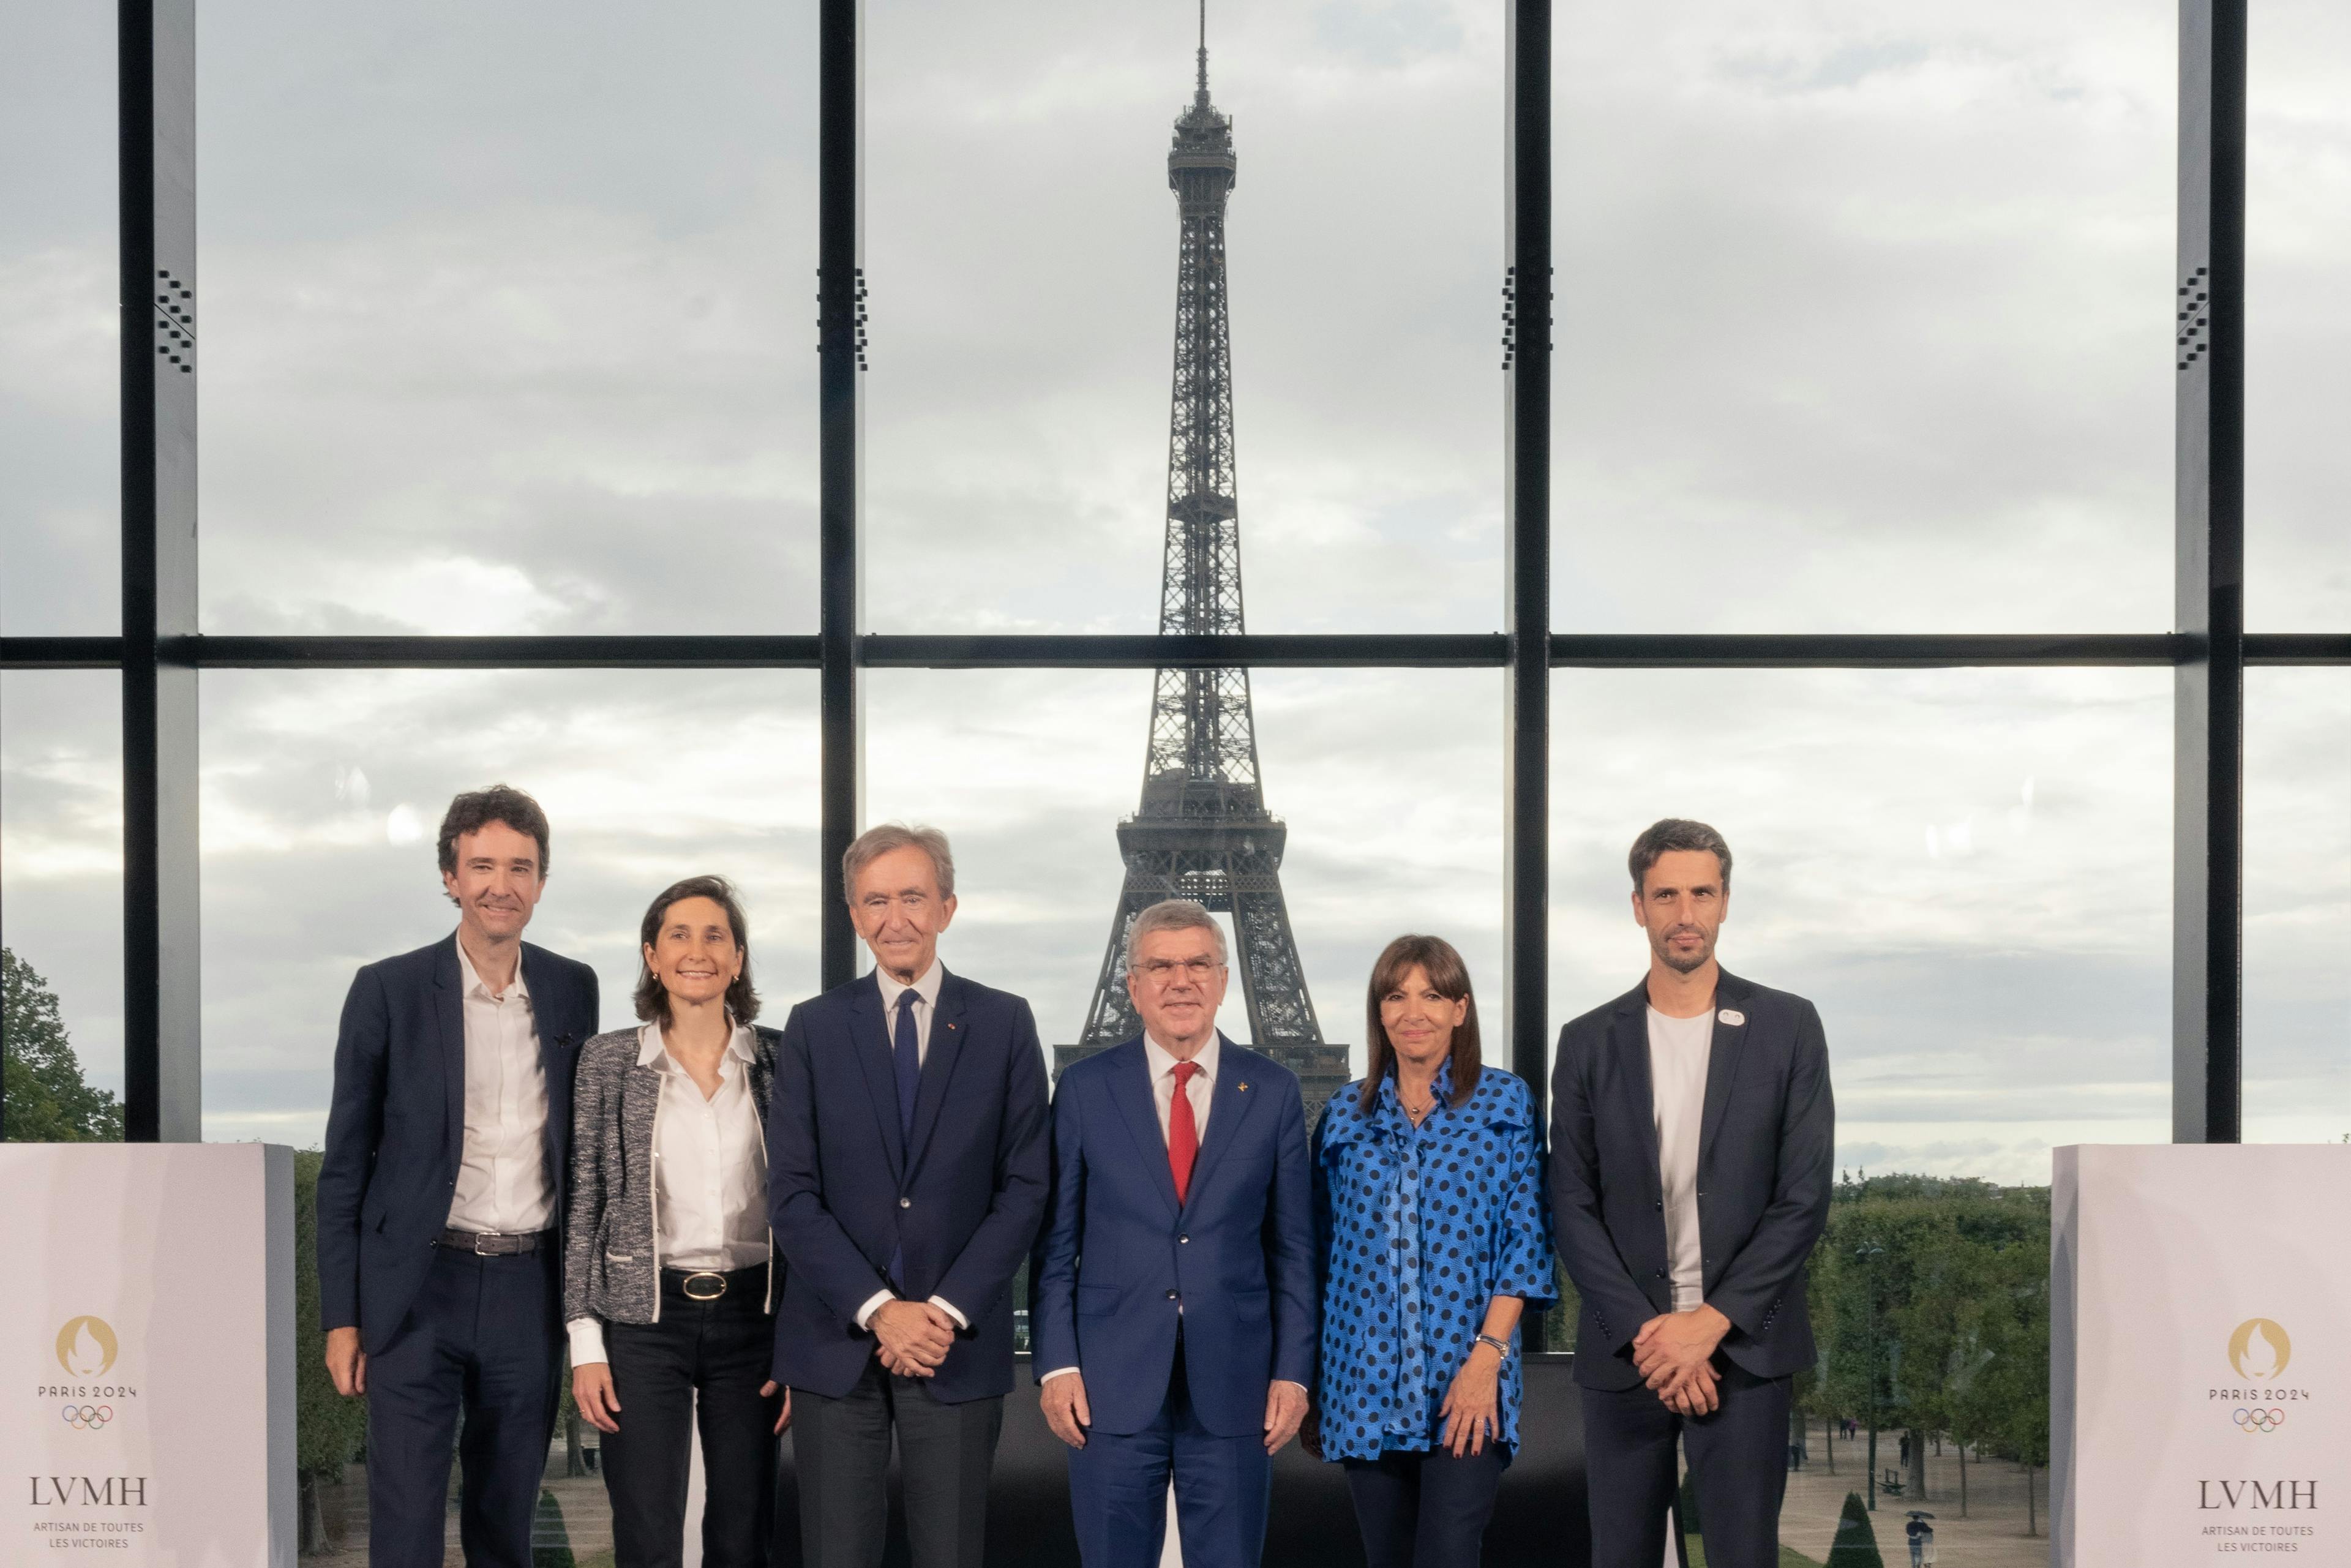 Thumbnail LVMH has become a Premium Partner of the Olympic & Paralympic Games Paris 2024 and will share its creative excellence and craftsmanship for key celebratory moments during the Olympic and Paralympic Games